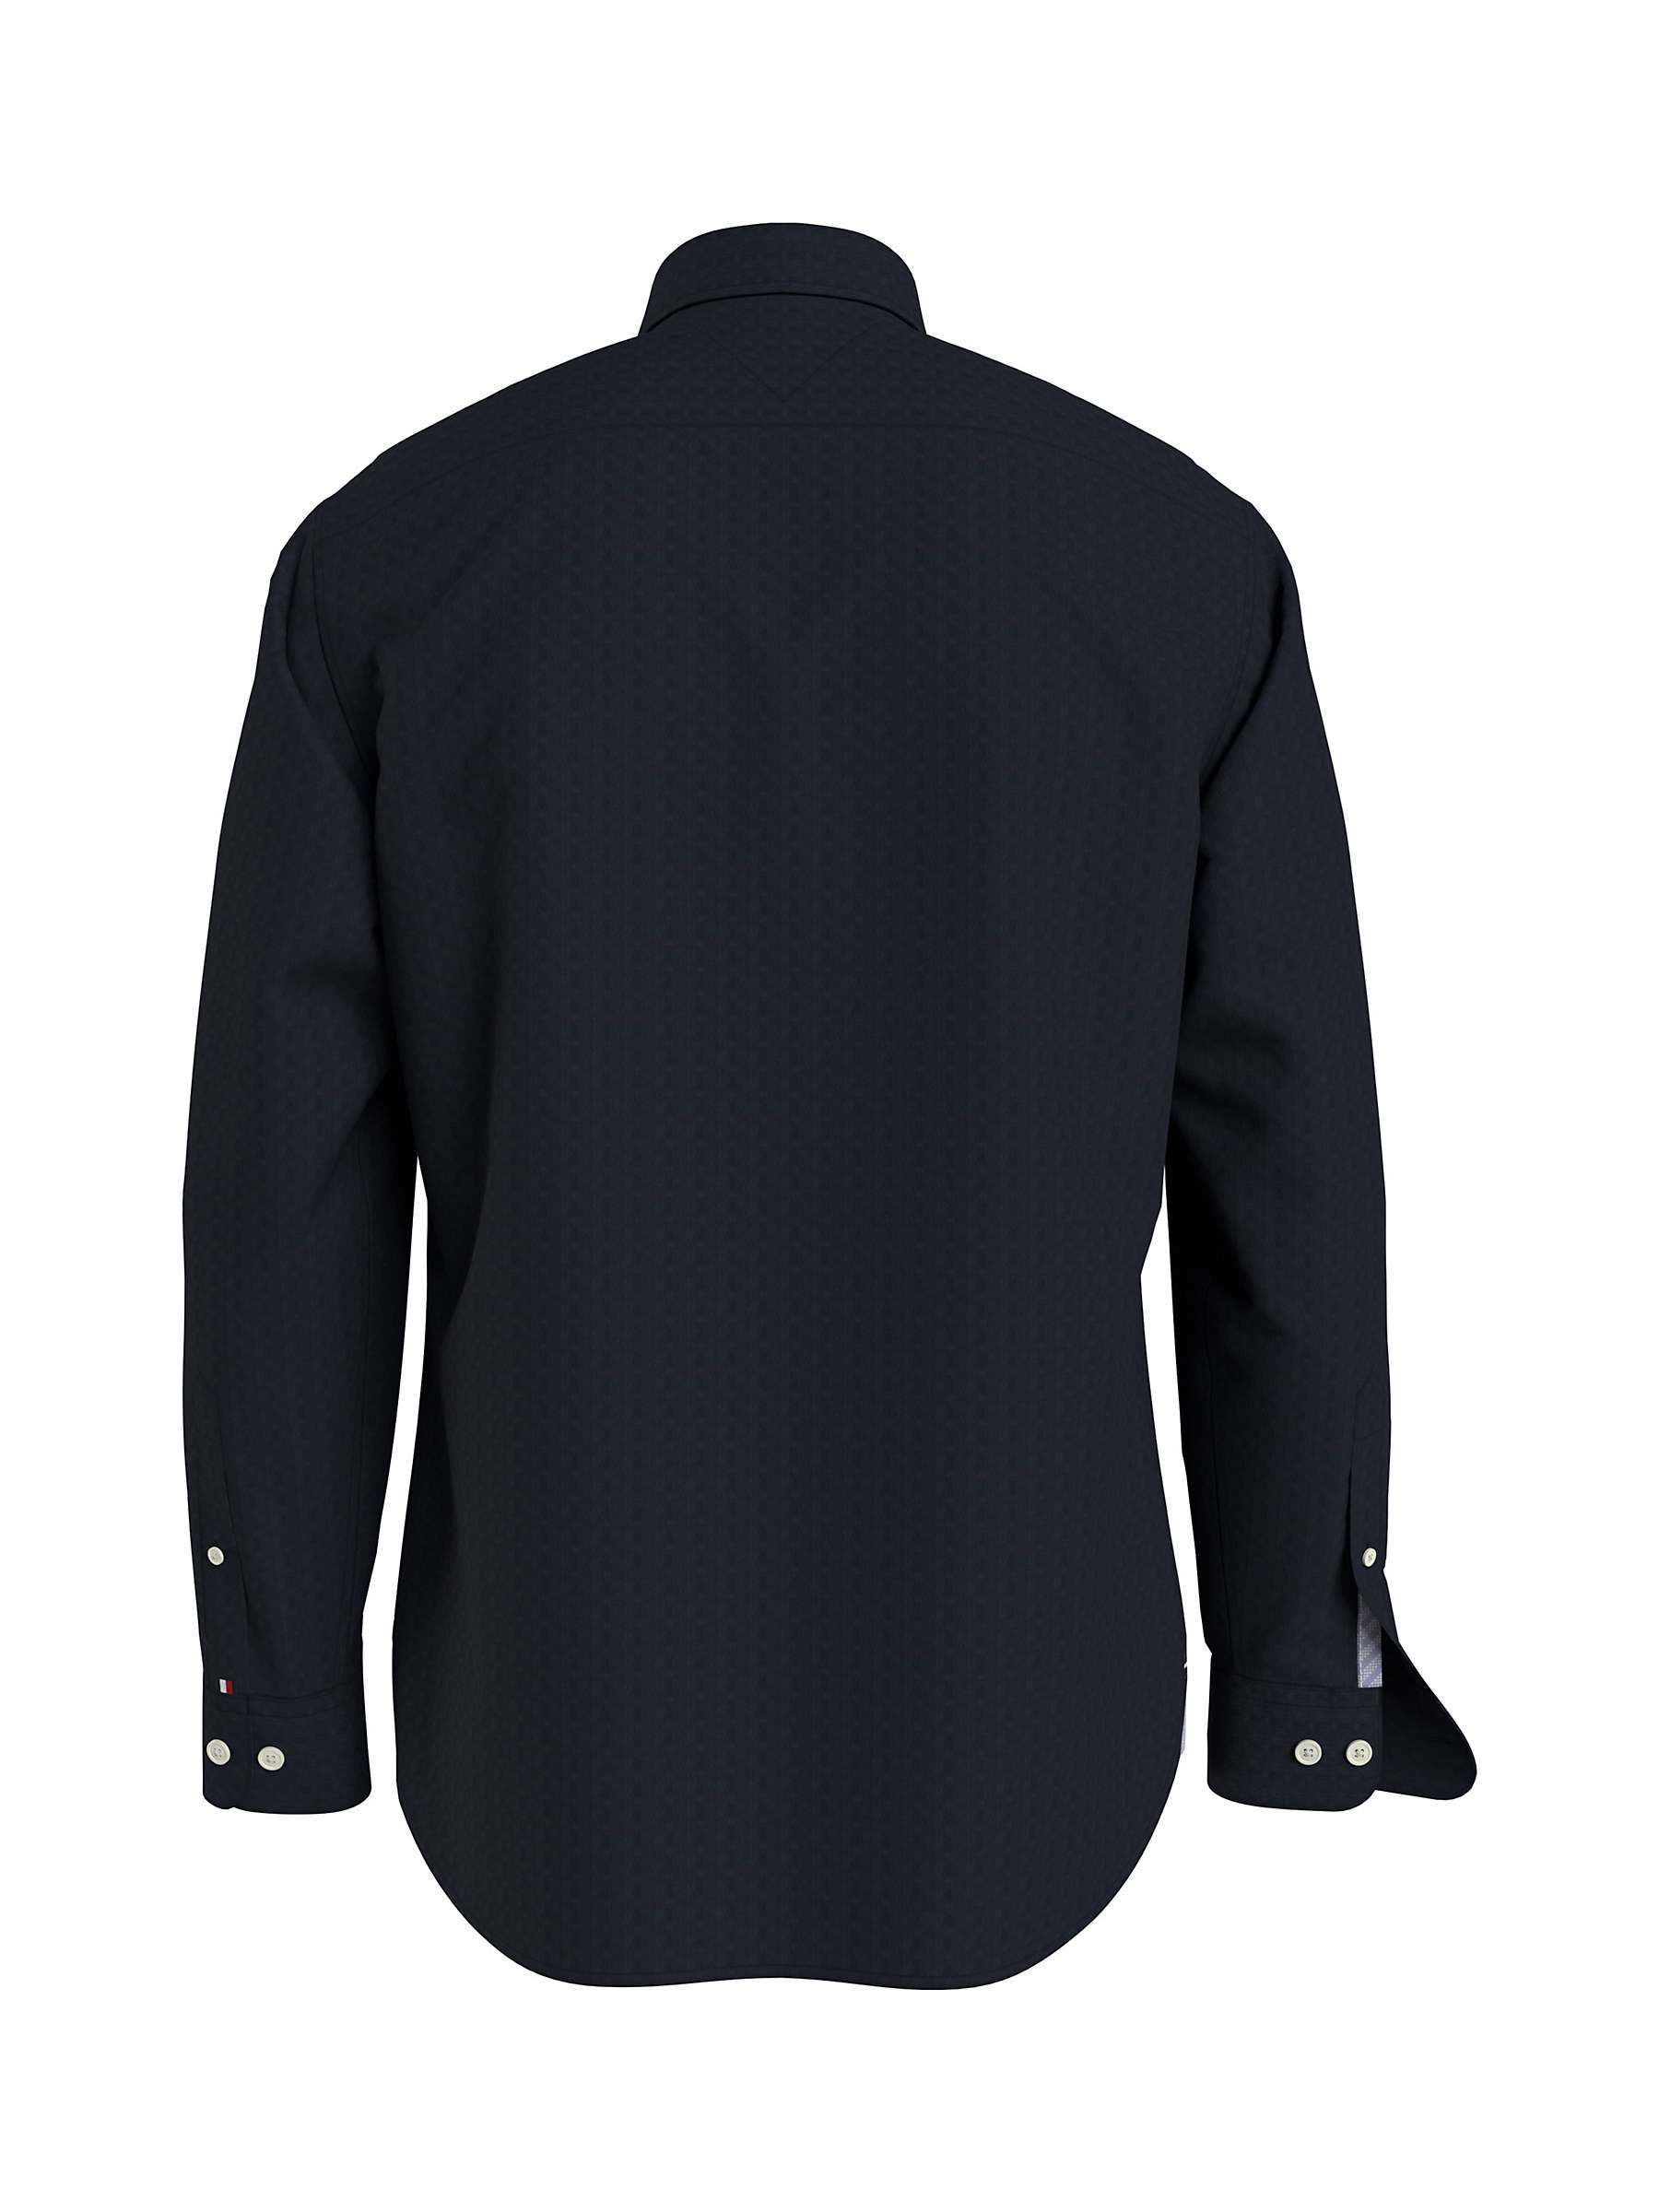 Buy Tommy Hilfiger Oxford Dobby Long Sleeve Shirt, Navy Online at johnlewis.com